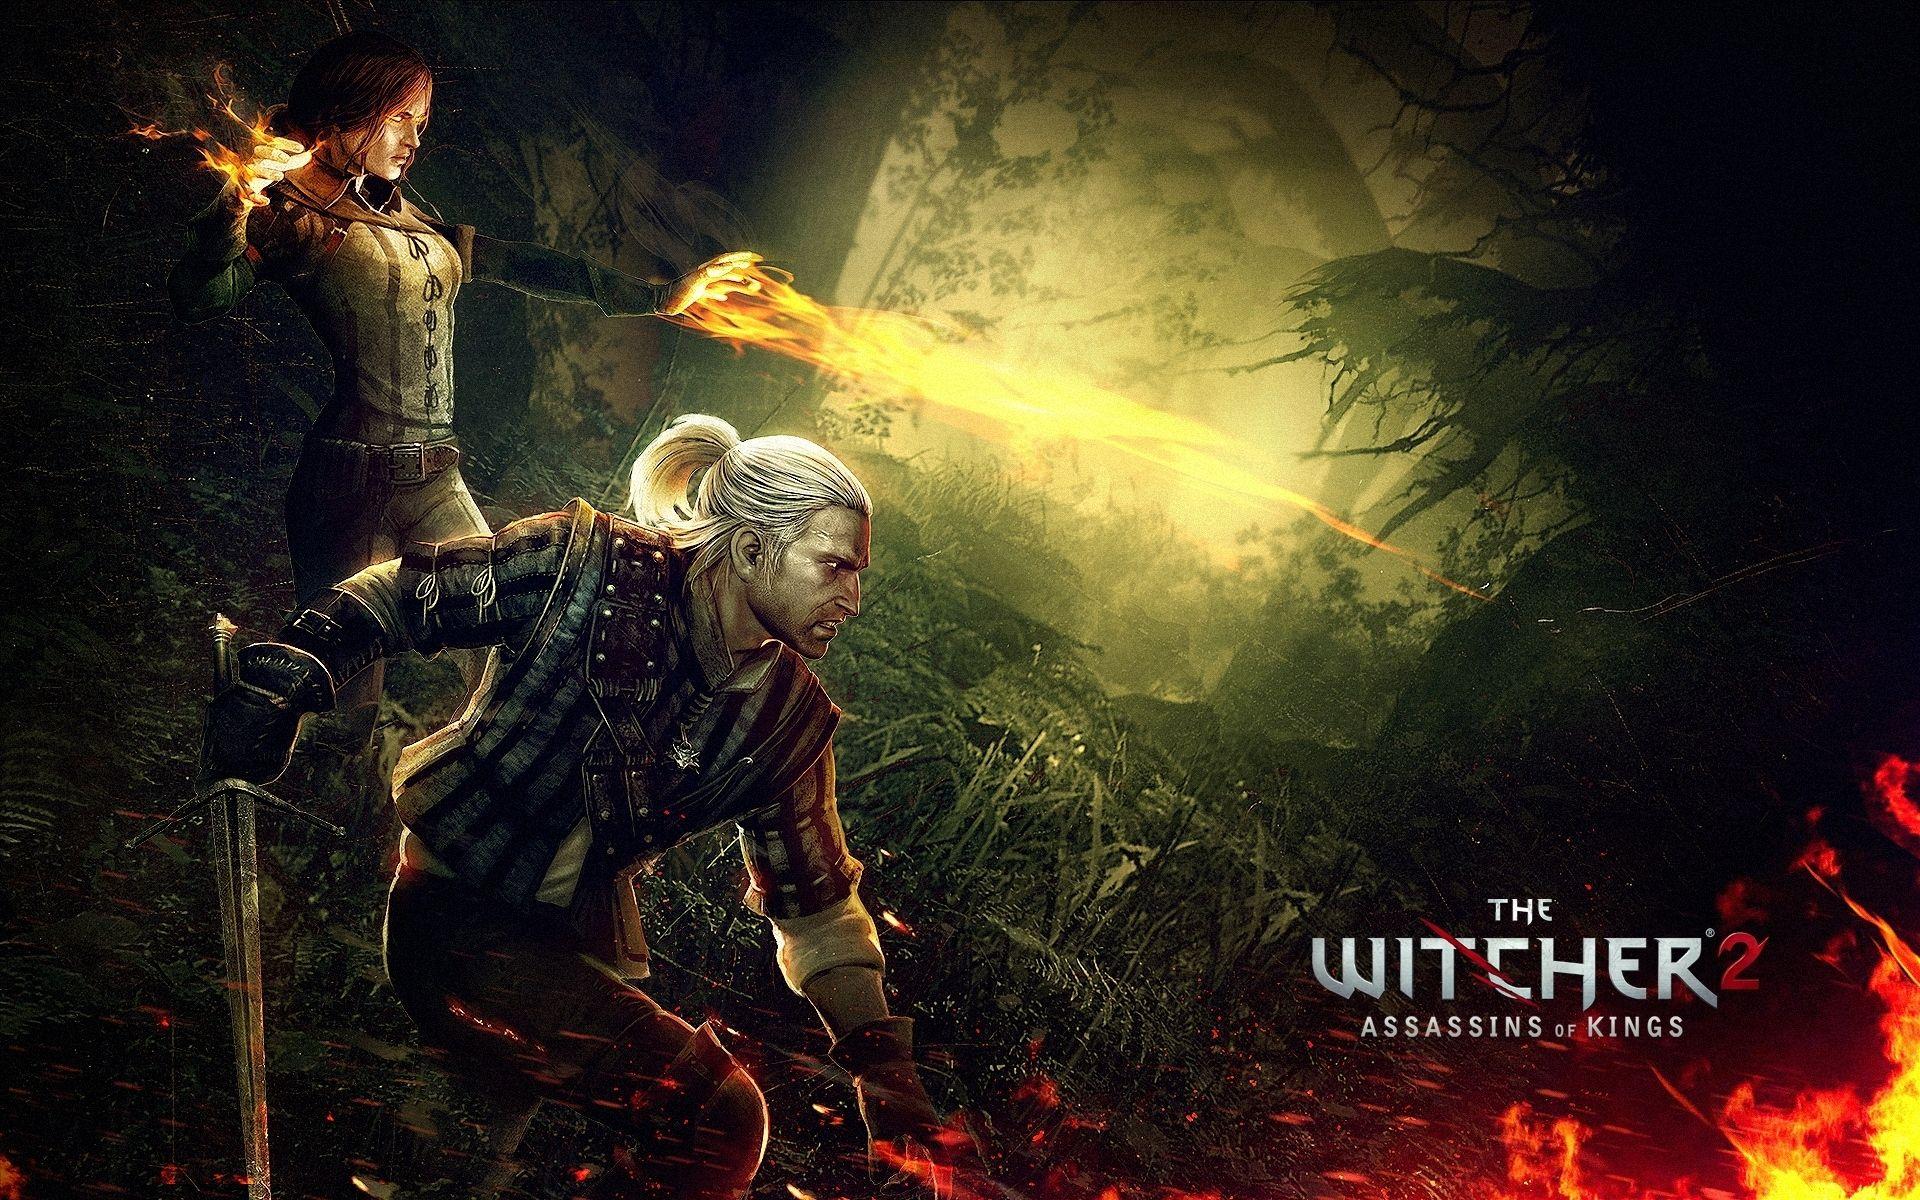 The Witcher 2: Assassins Of Kings Wallpaper, Picture, Image